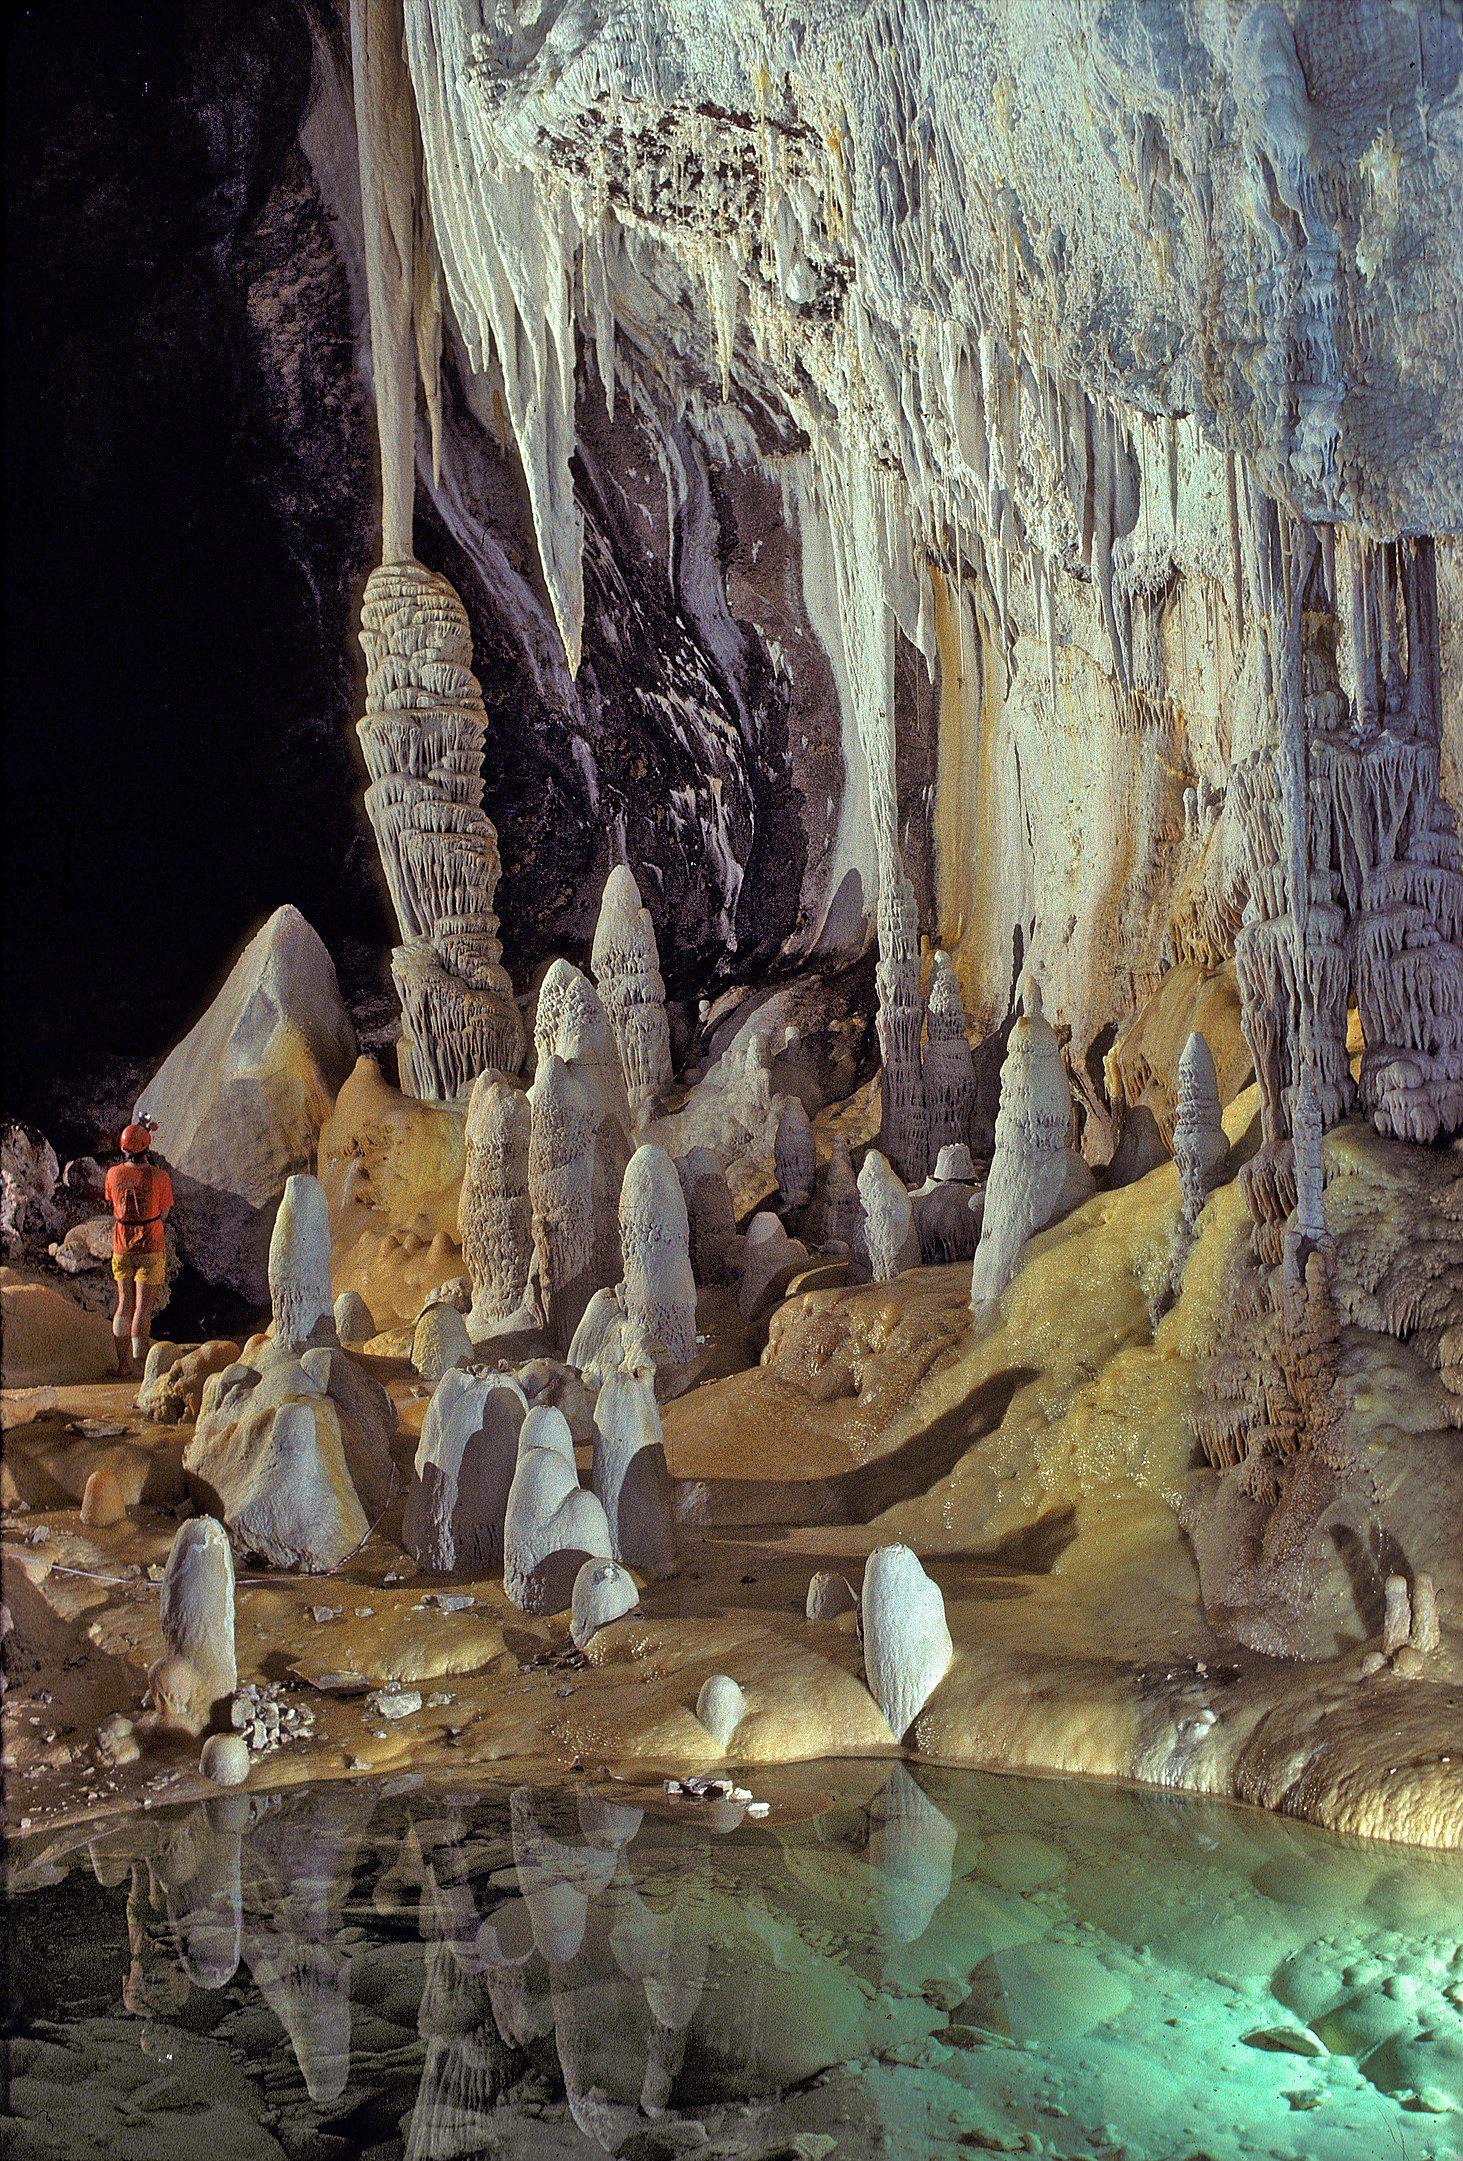 Stalagmites, stalactites, and draperies by a pool in Lechuguilla Cave in New Mexico, USA